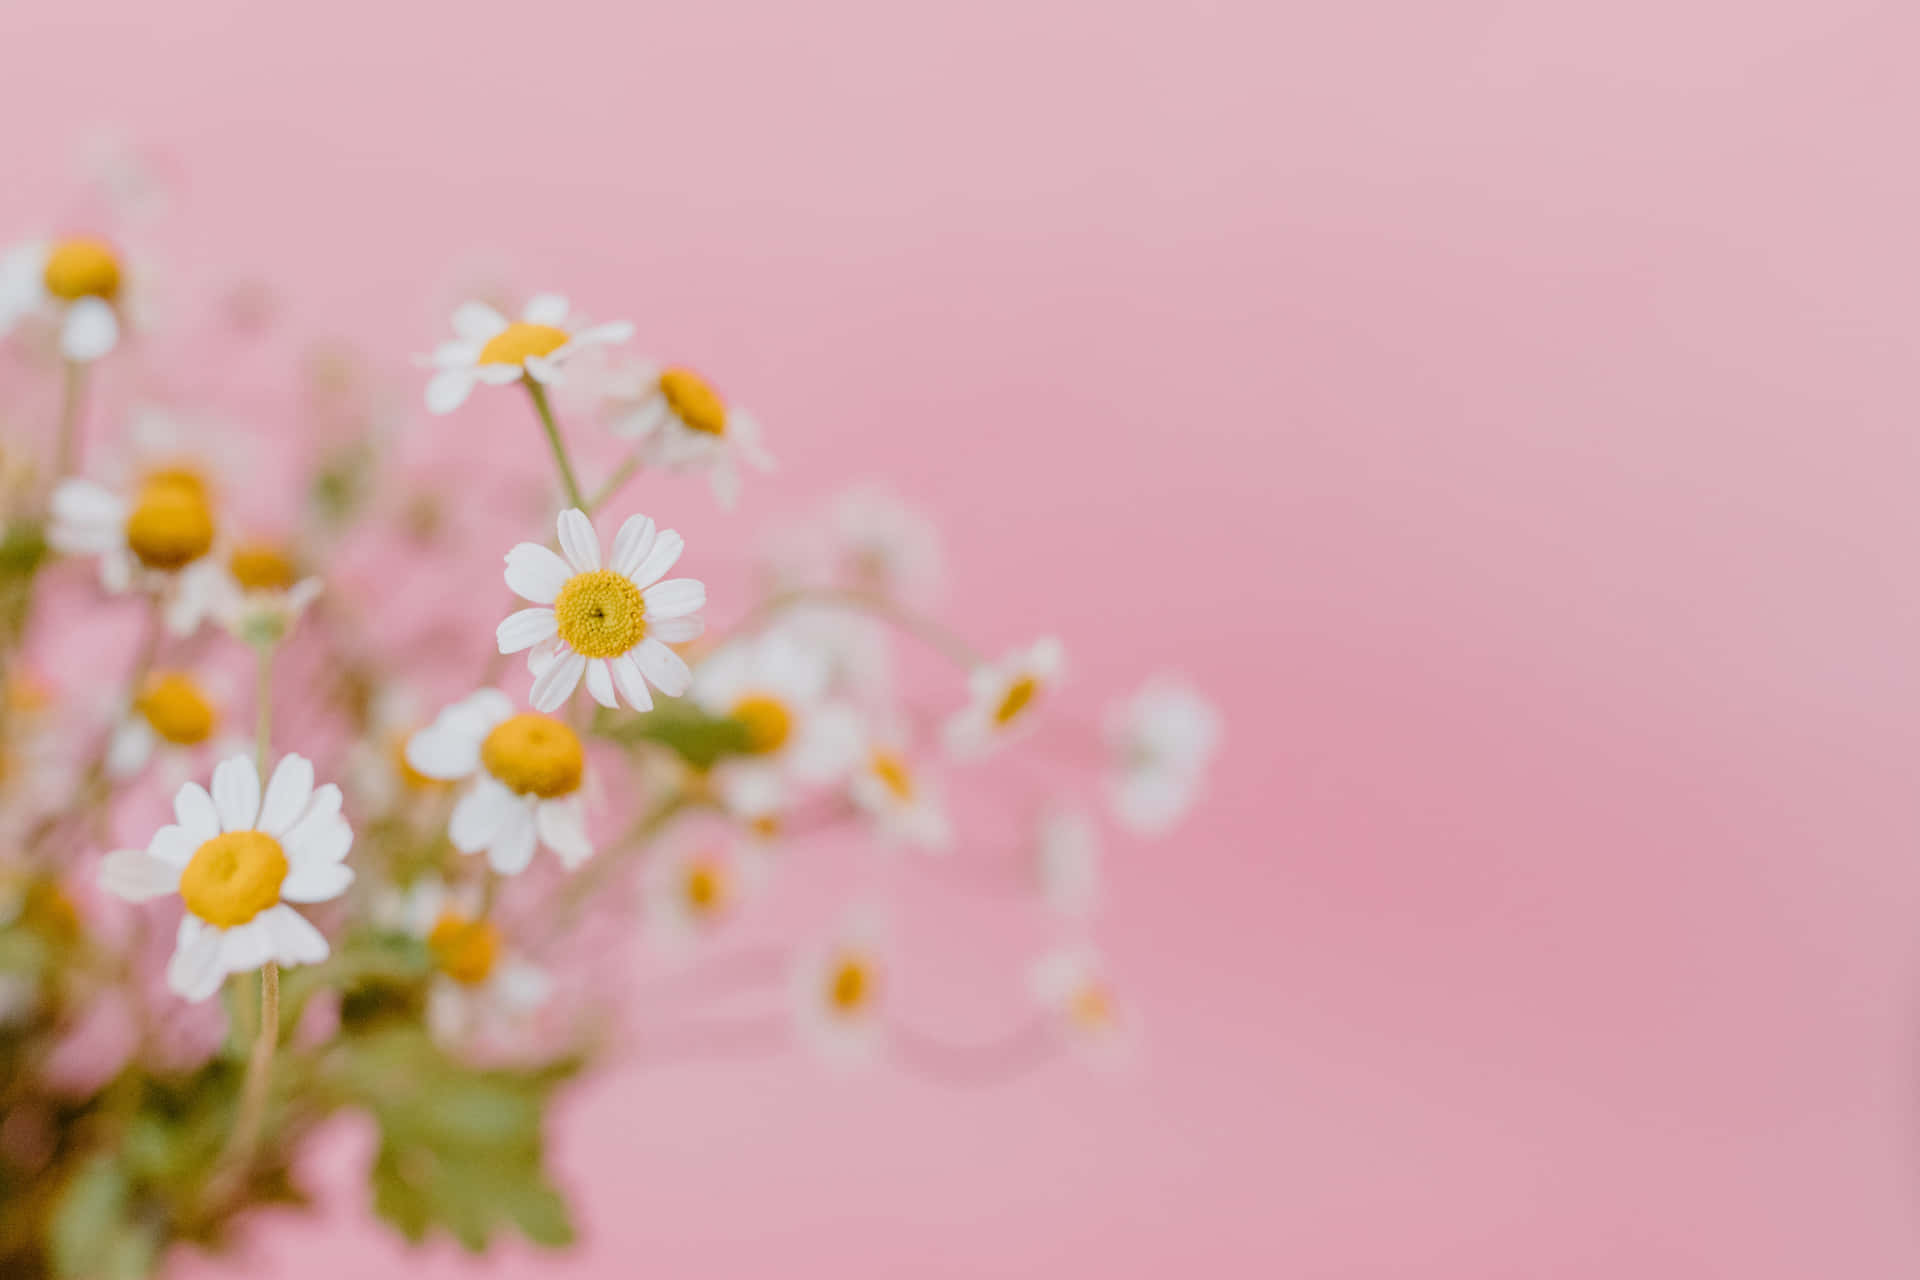 A Vase Of Daisies On A Pink Background